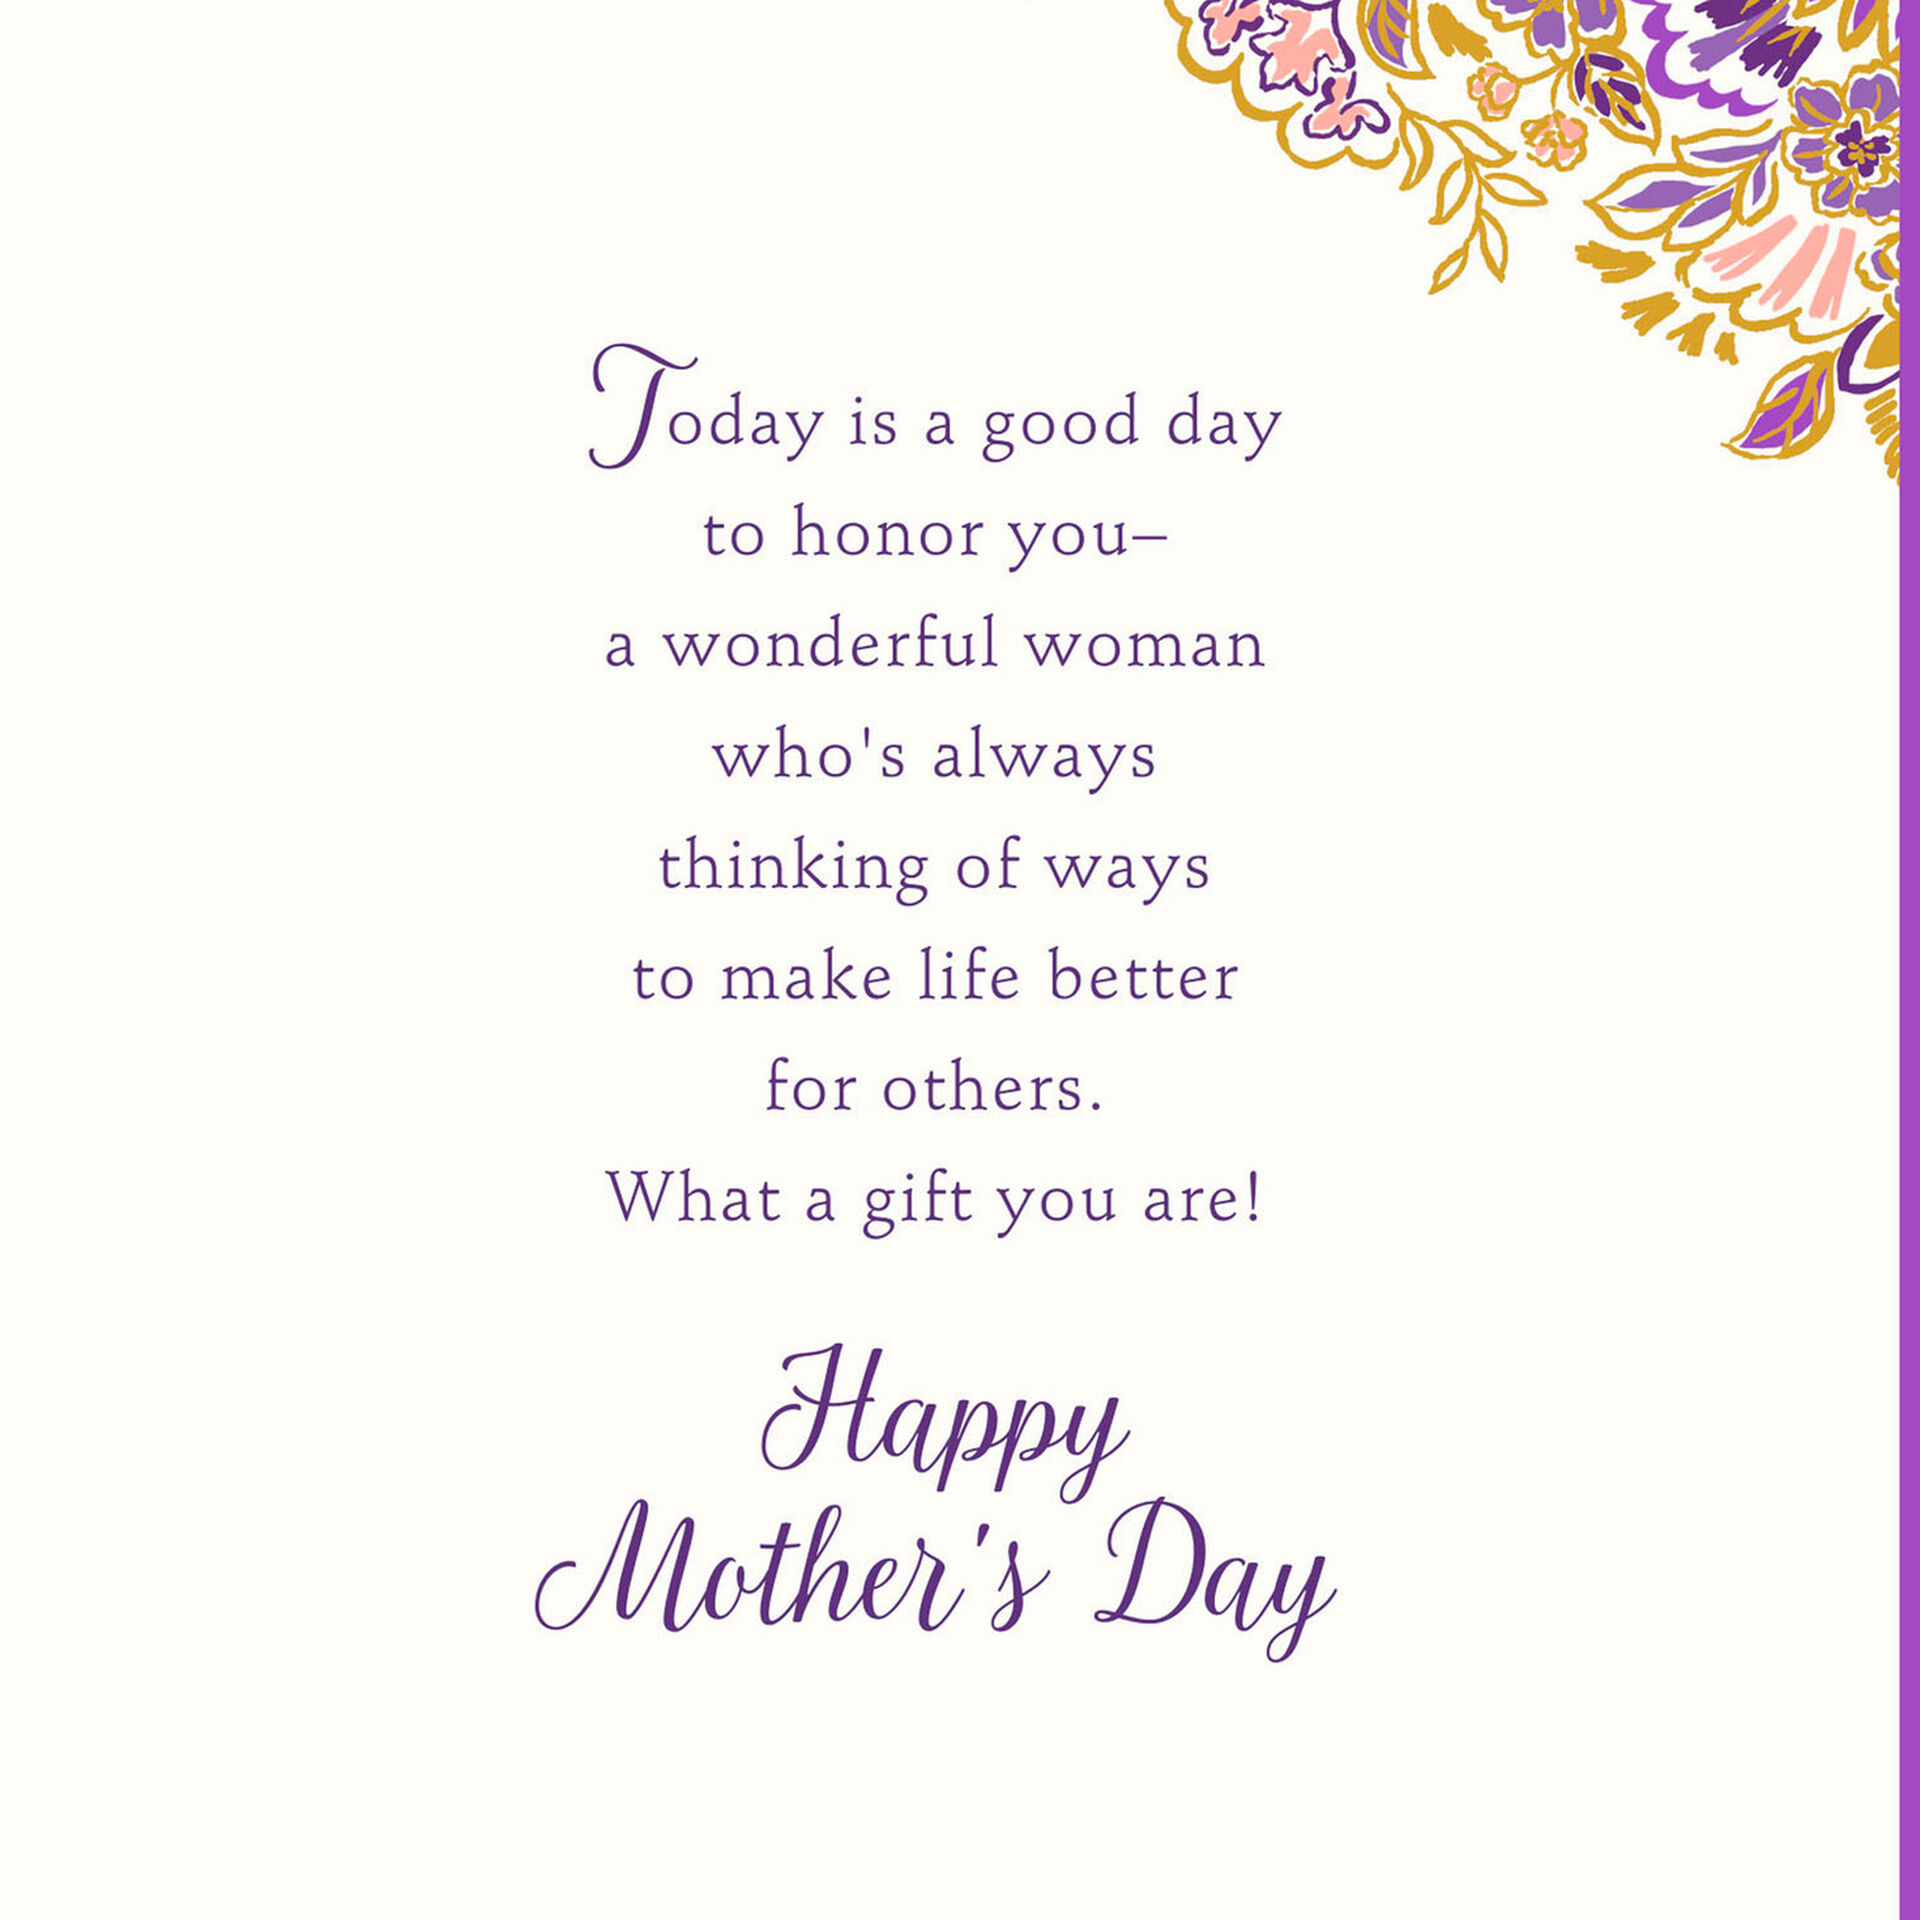 Celebrating You Mother's Day Card - Greeting Cards - Hallmark